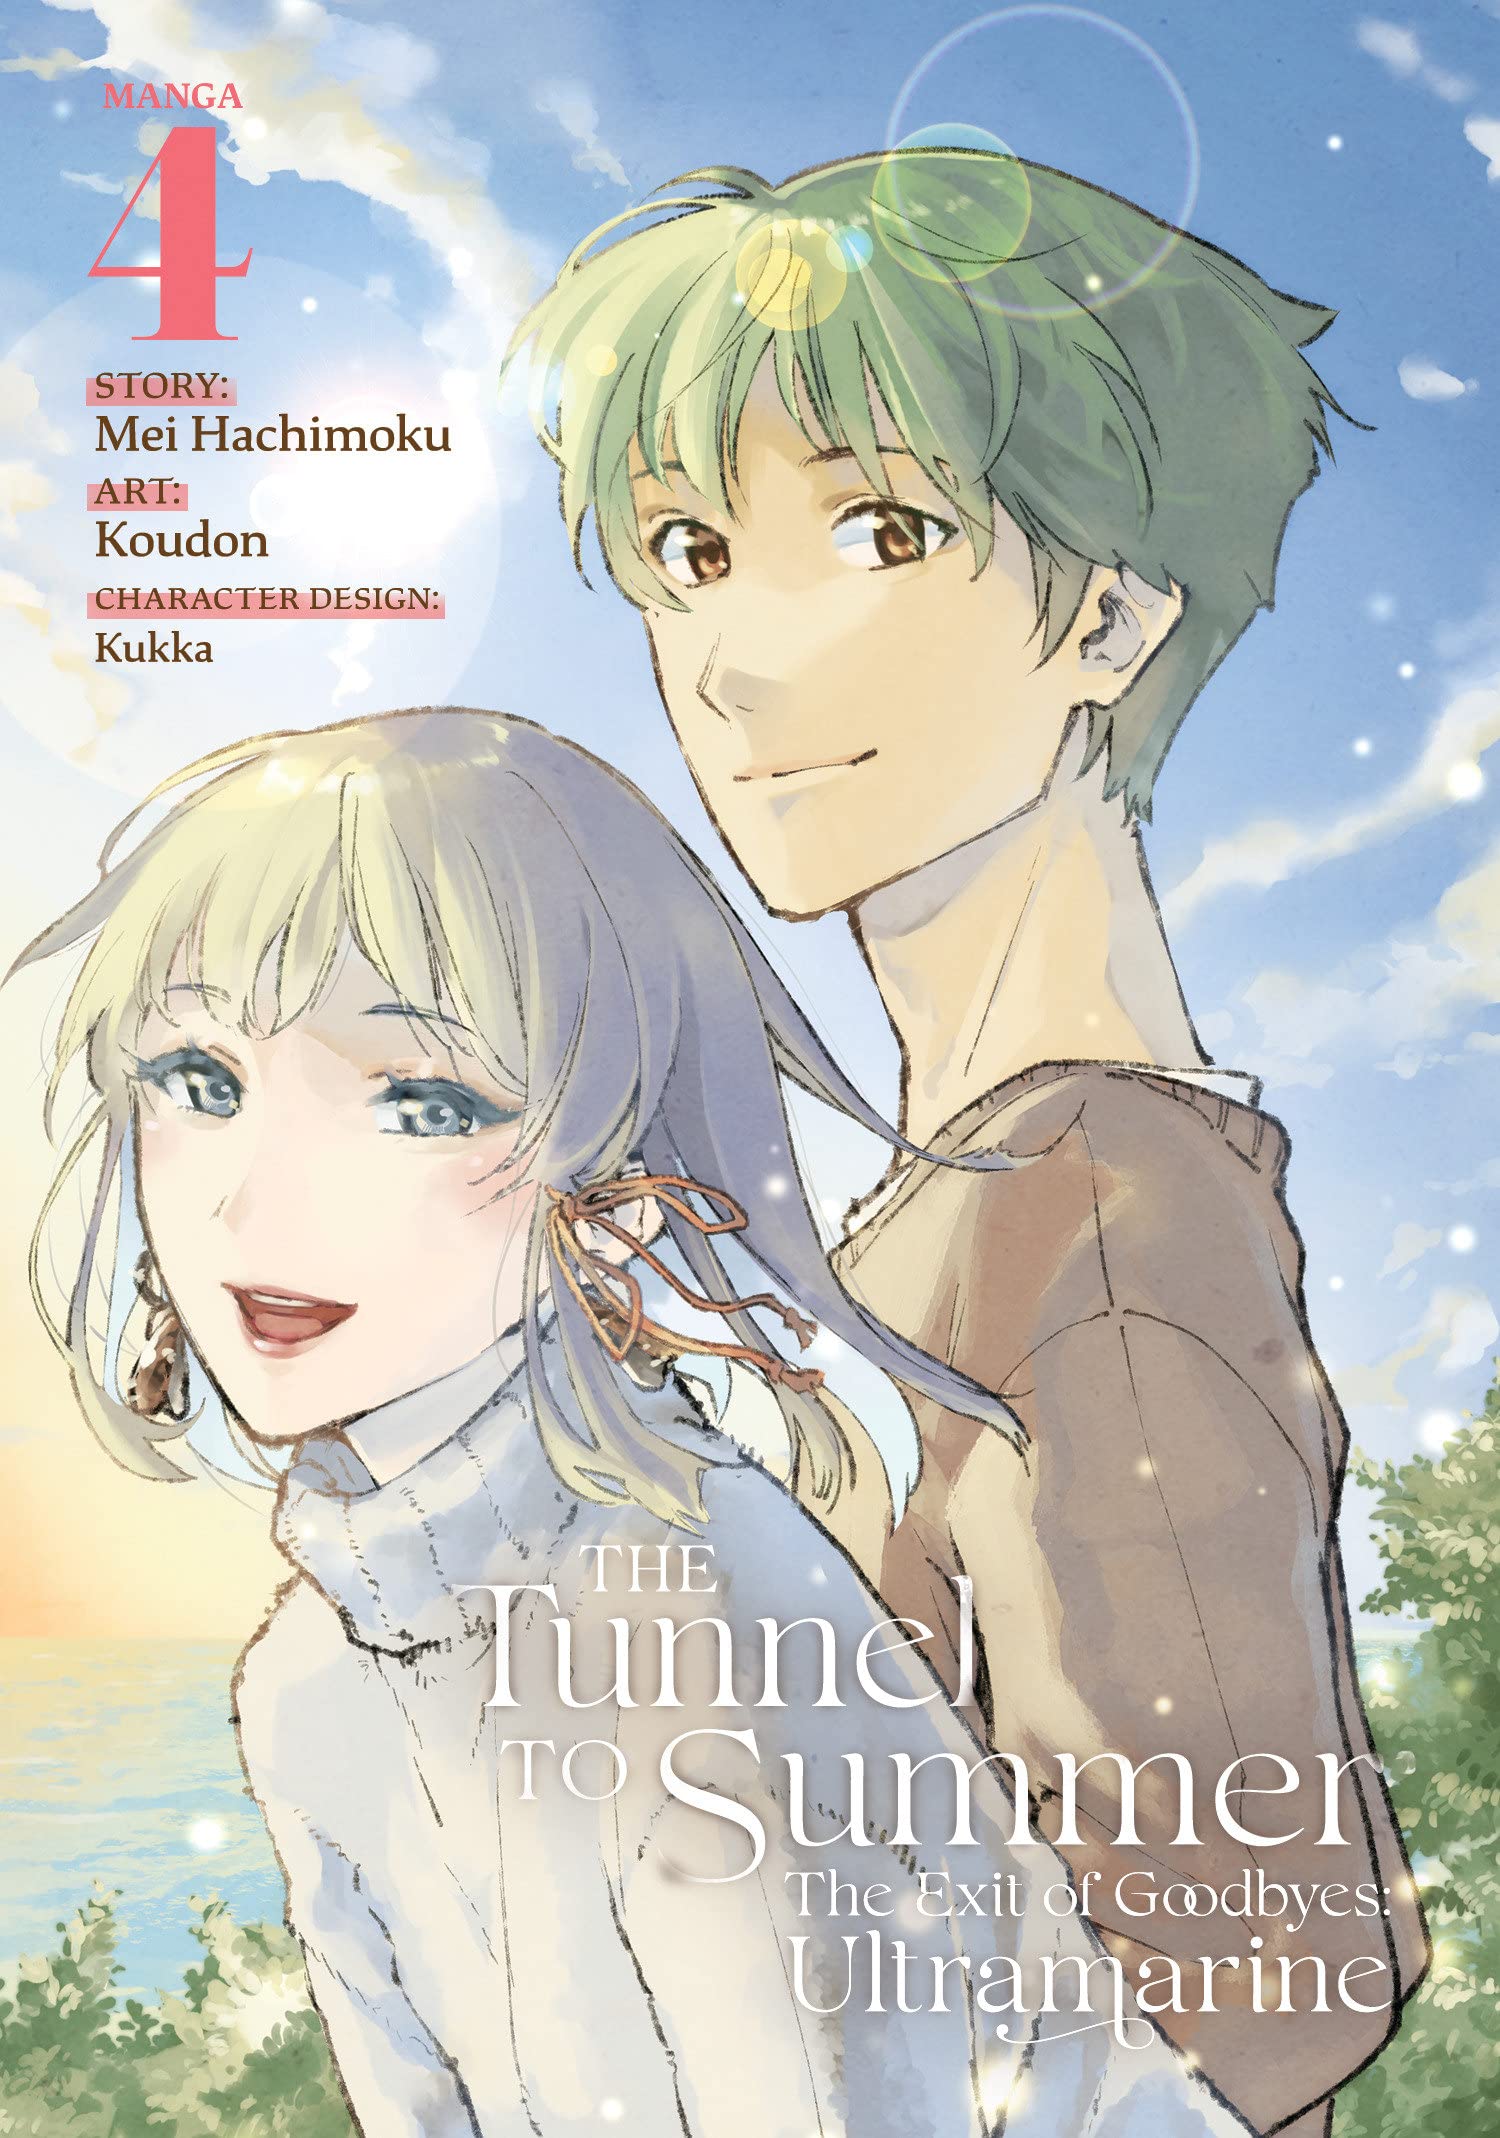 The Tunnel to Summer, the Exit of Goodbyes: Ultramarine (Manga) Vol. 04